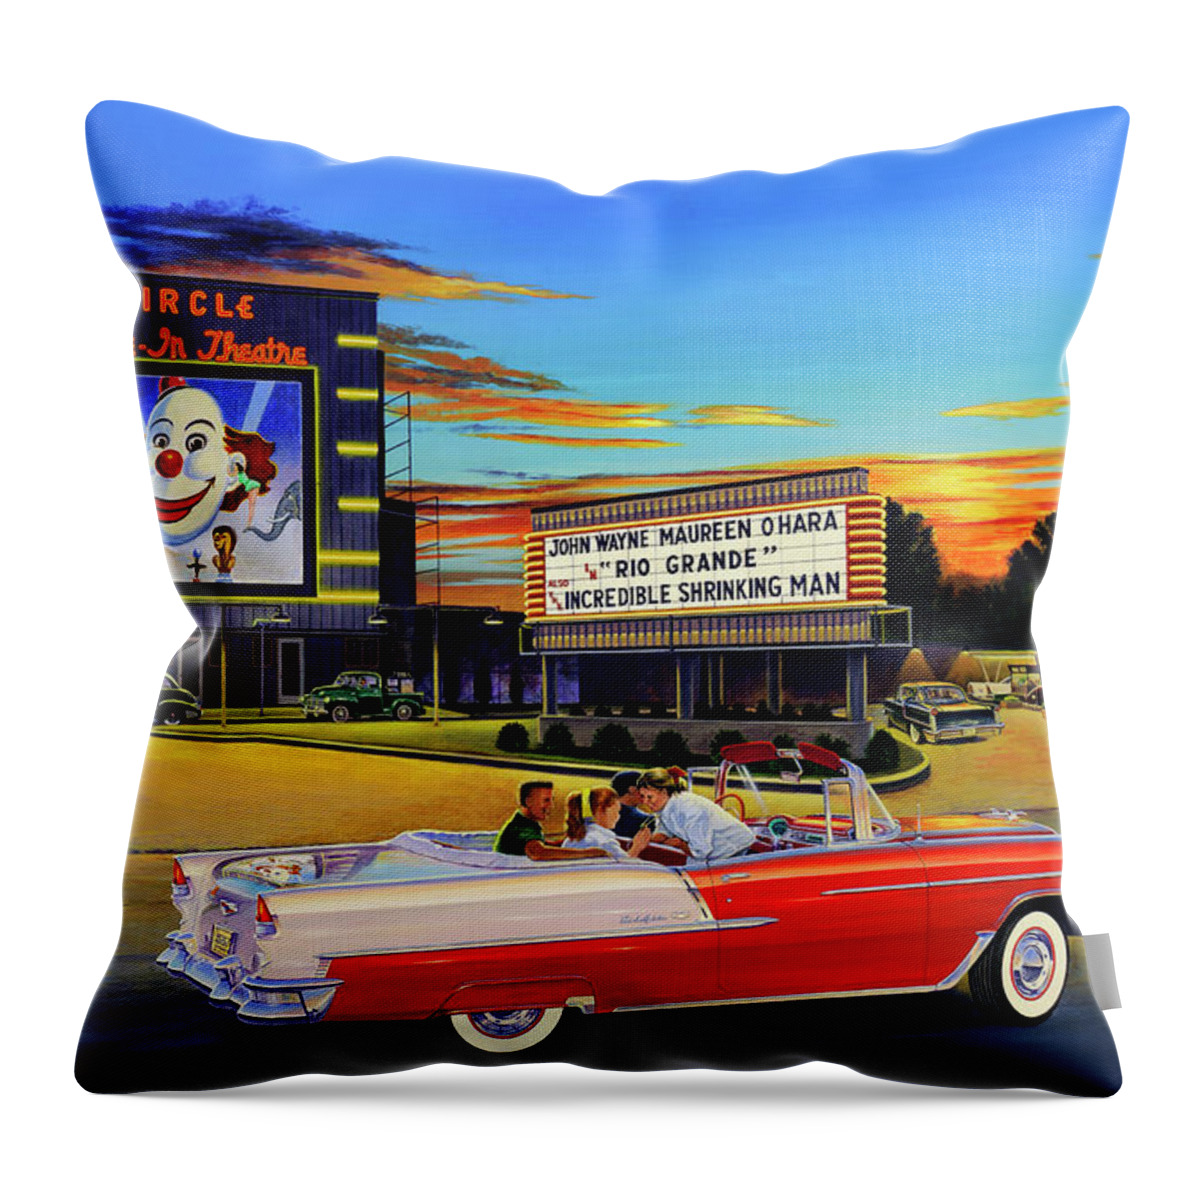 Circle Drive-in Theatre Throw Pillow featuring the painting Goin' Steady - The Circle Drive-In Theatre by Randy Welborn